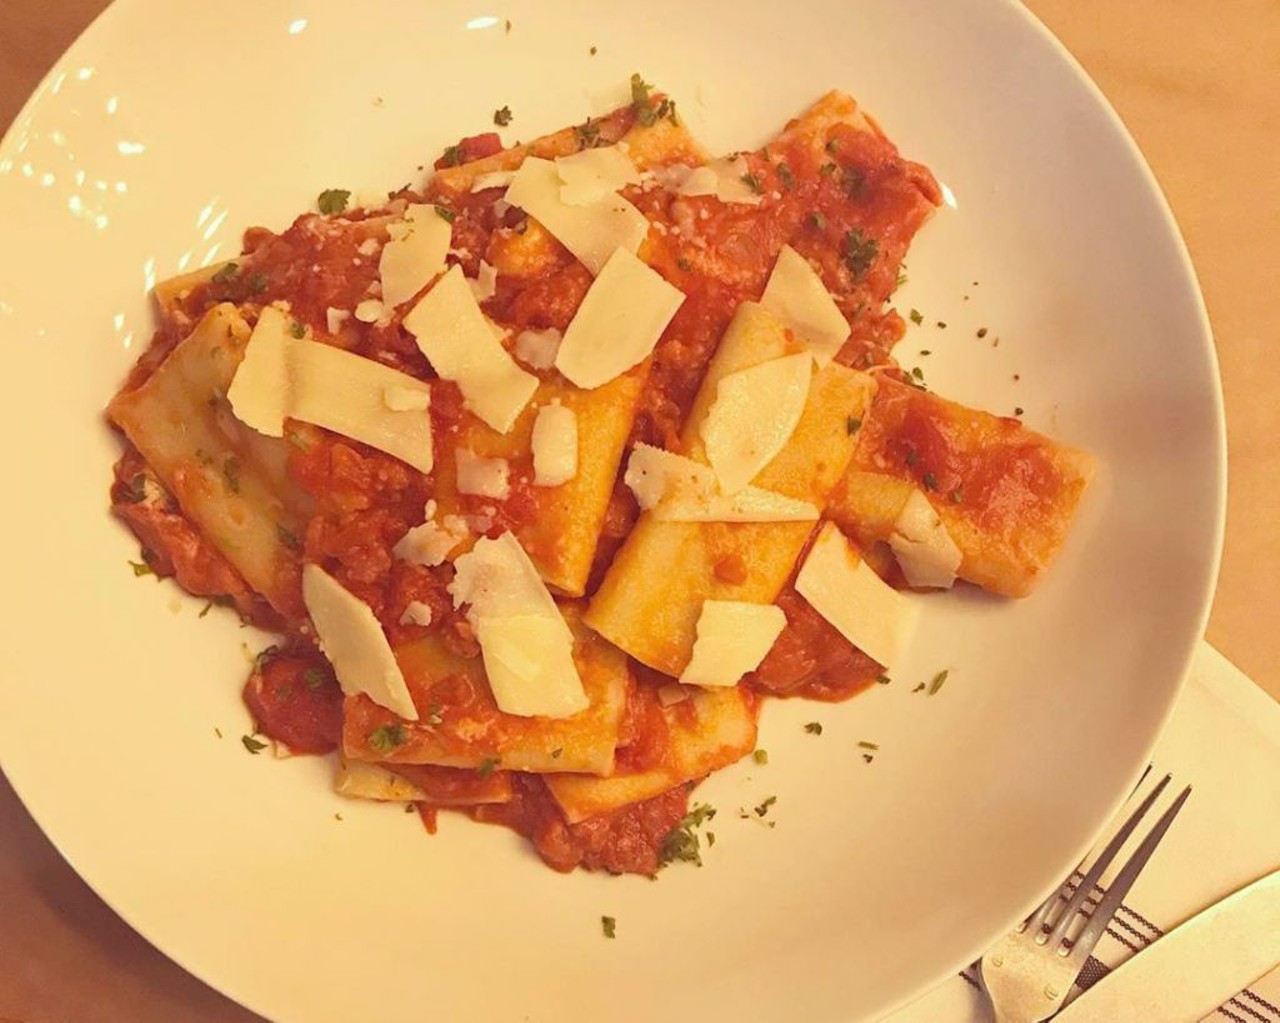 No. 5 New Best Bite: Paccheri amatriciana at Sette 
Thick, chewy, house-made noodles have the perfect texture, but Sette improves on perfection with their amatriciana, a tomato-based sauce with cured pancetta (like bacon, but betta), onion and chili flakes that add some heat.Photo by Sette/Instagram
